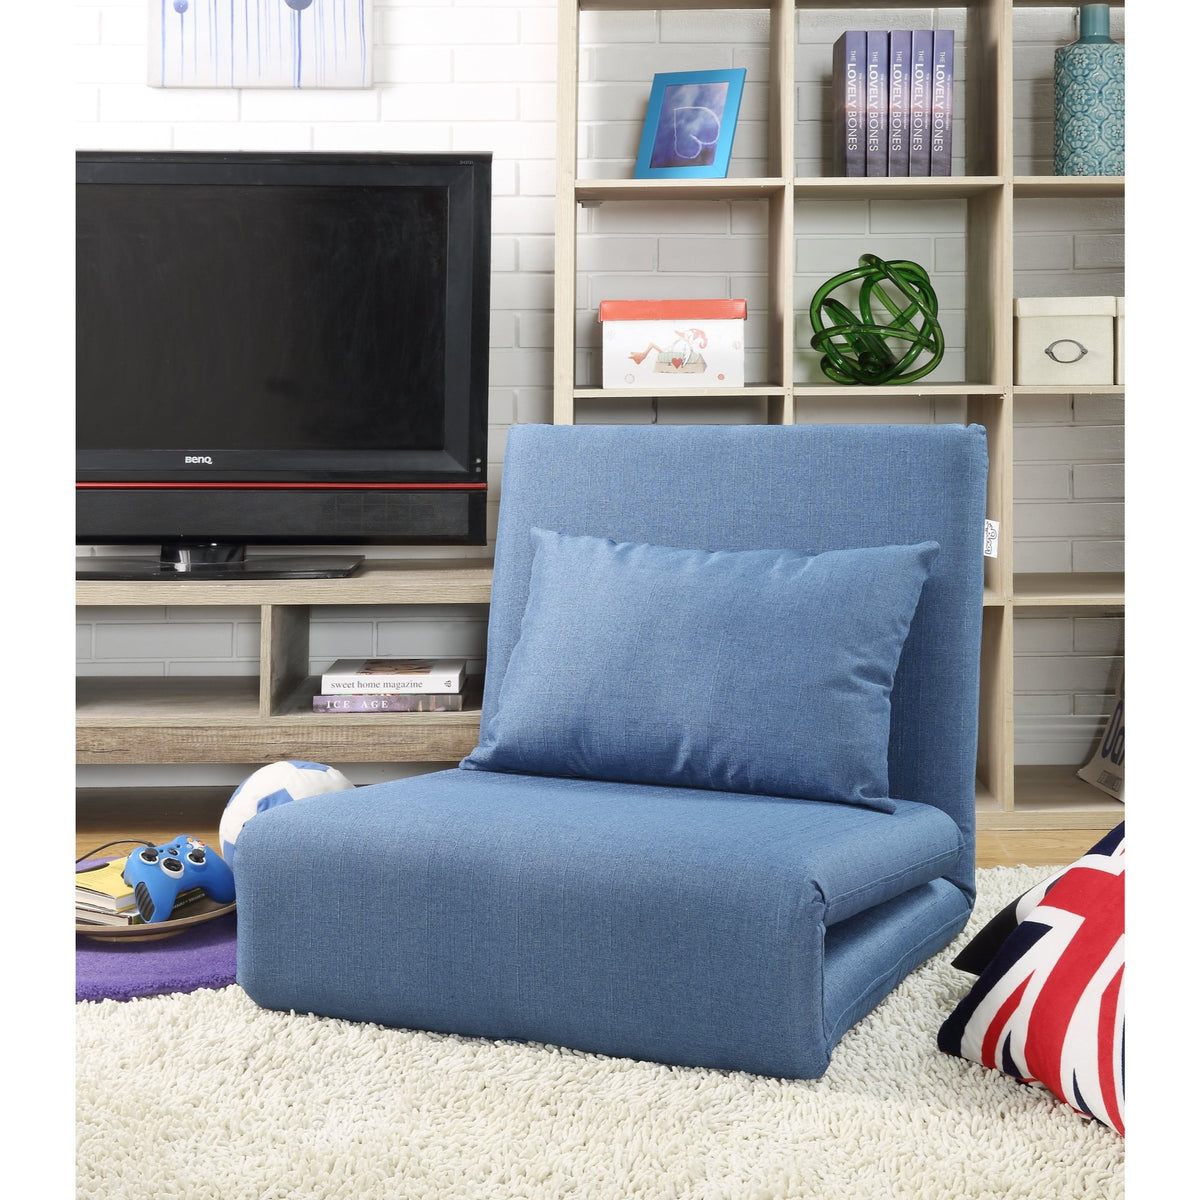 Loungie Linen Chair Sleeper Dorm Bed Couch Lounger Sofa Blue